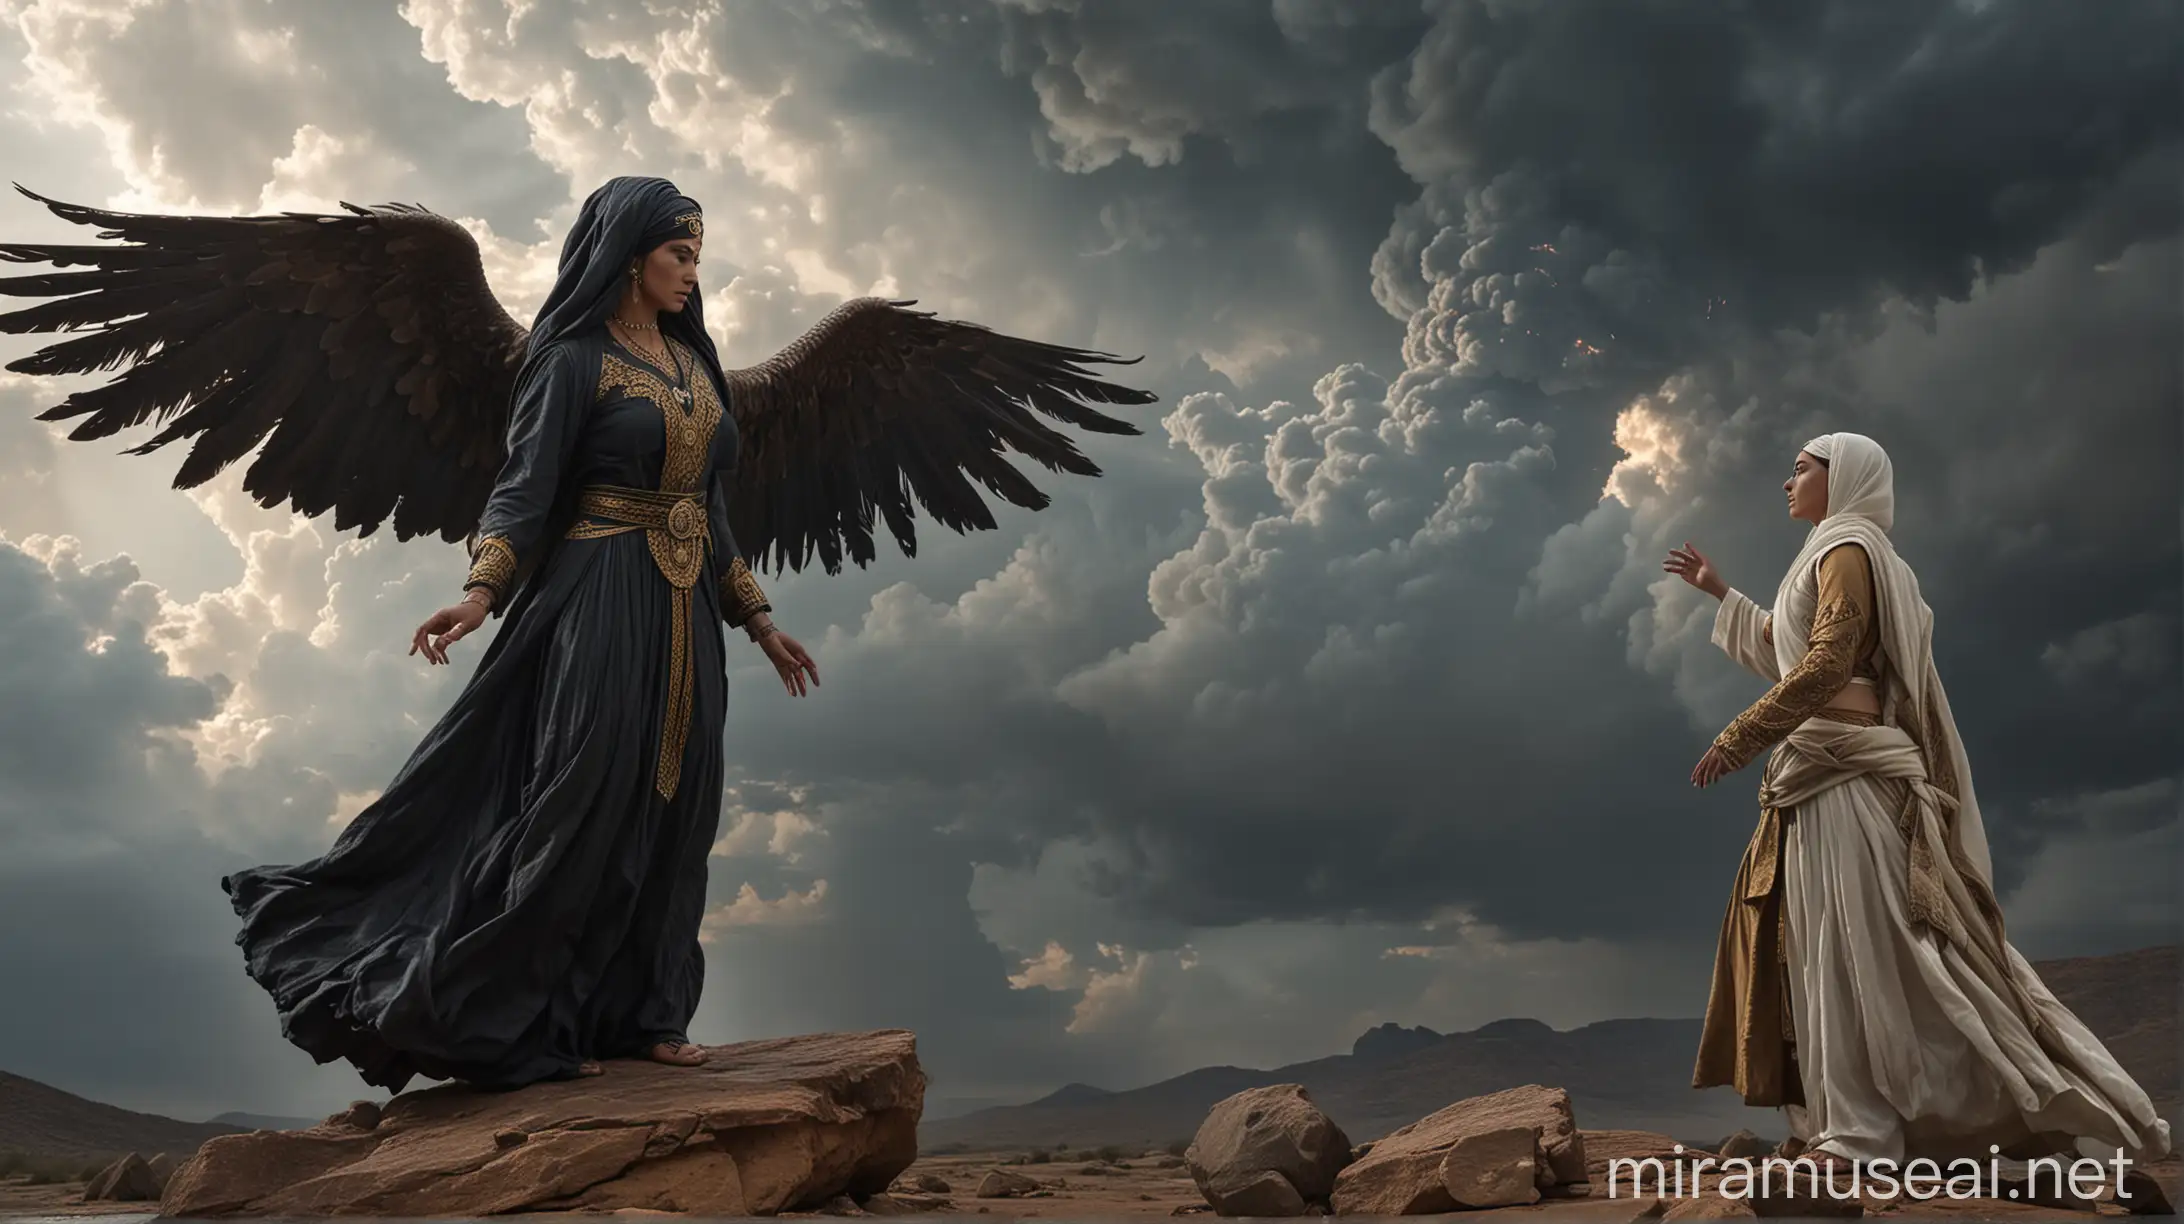 This image depicts a dramatic and intense scene with two main characters. The figure in front appears smaller, wearing an Arabian turban and long Arabian dress, styled like a painting, and standing on a rock, looking towards a larger figure, and very large with wings. The larger figure looks angelic or divine, with wings which emits light. A powerful flash of energy or lightning connects the two figures. The sky is dark and cloudy, adding intensity to the scene. Fire and smoke rise from below, indicating destruction or conflict.